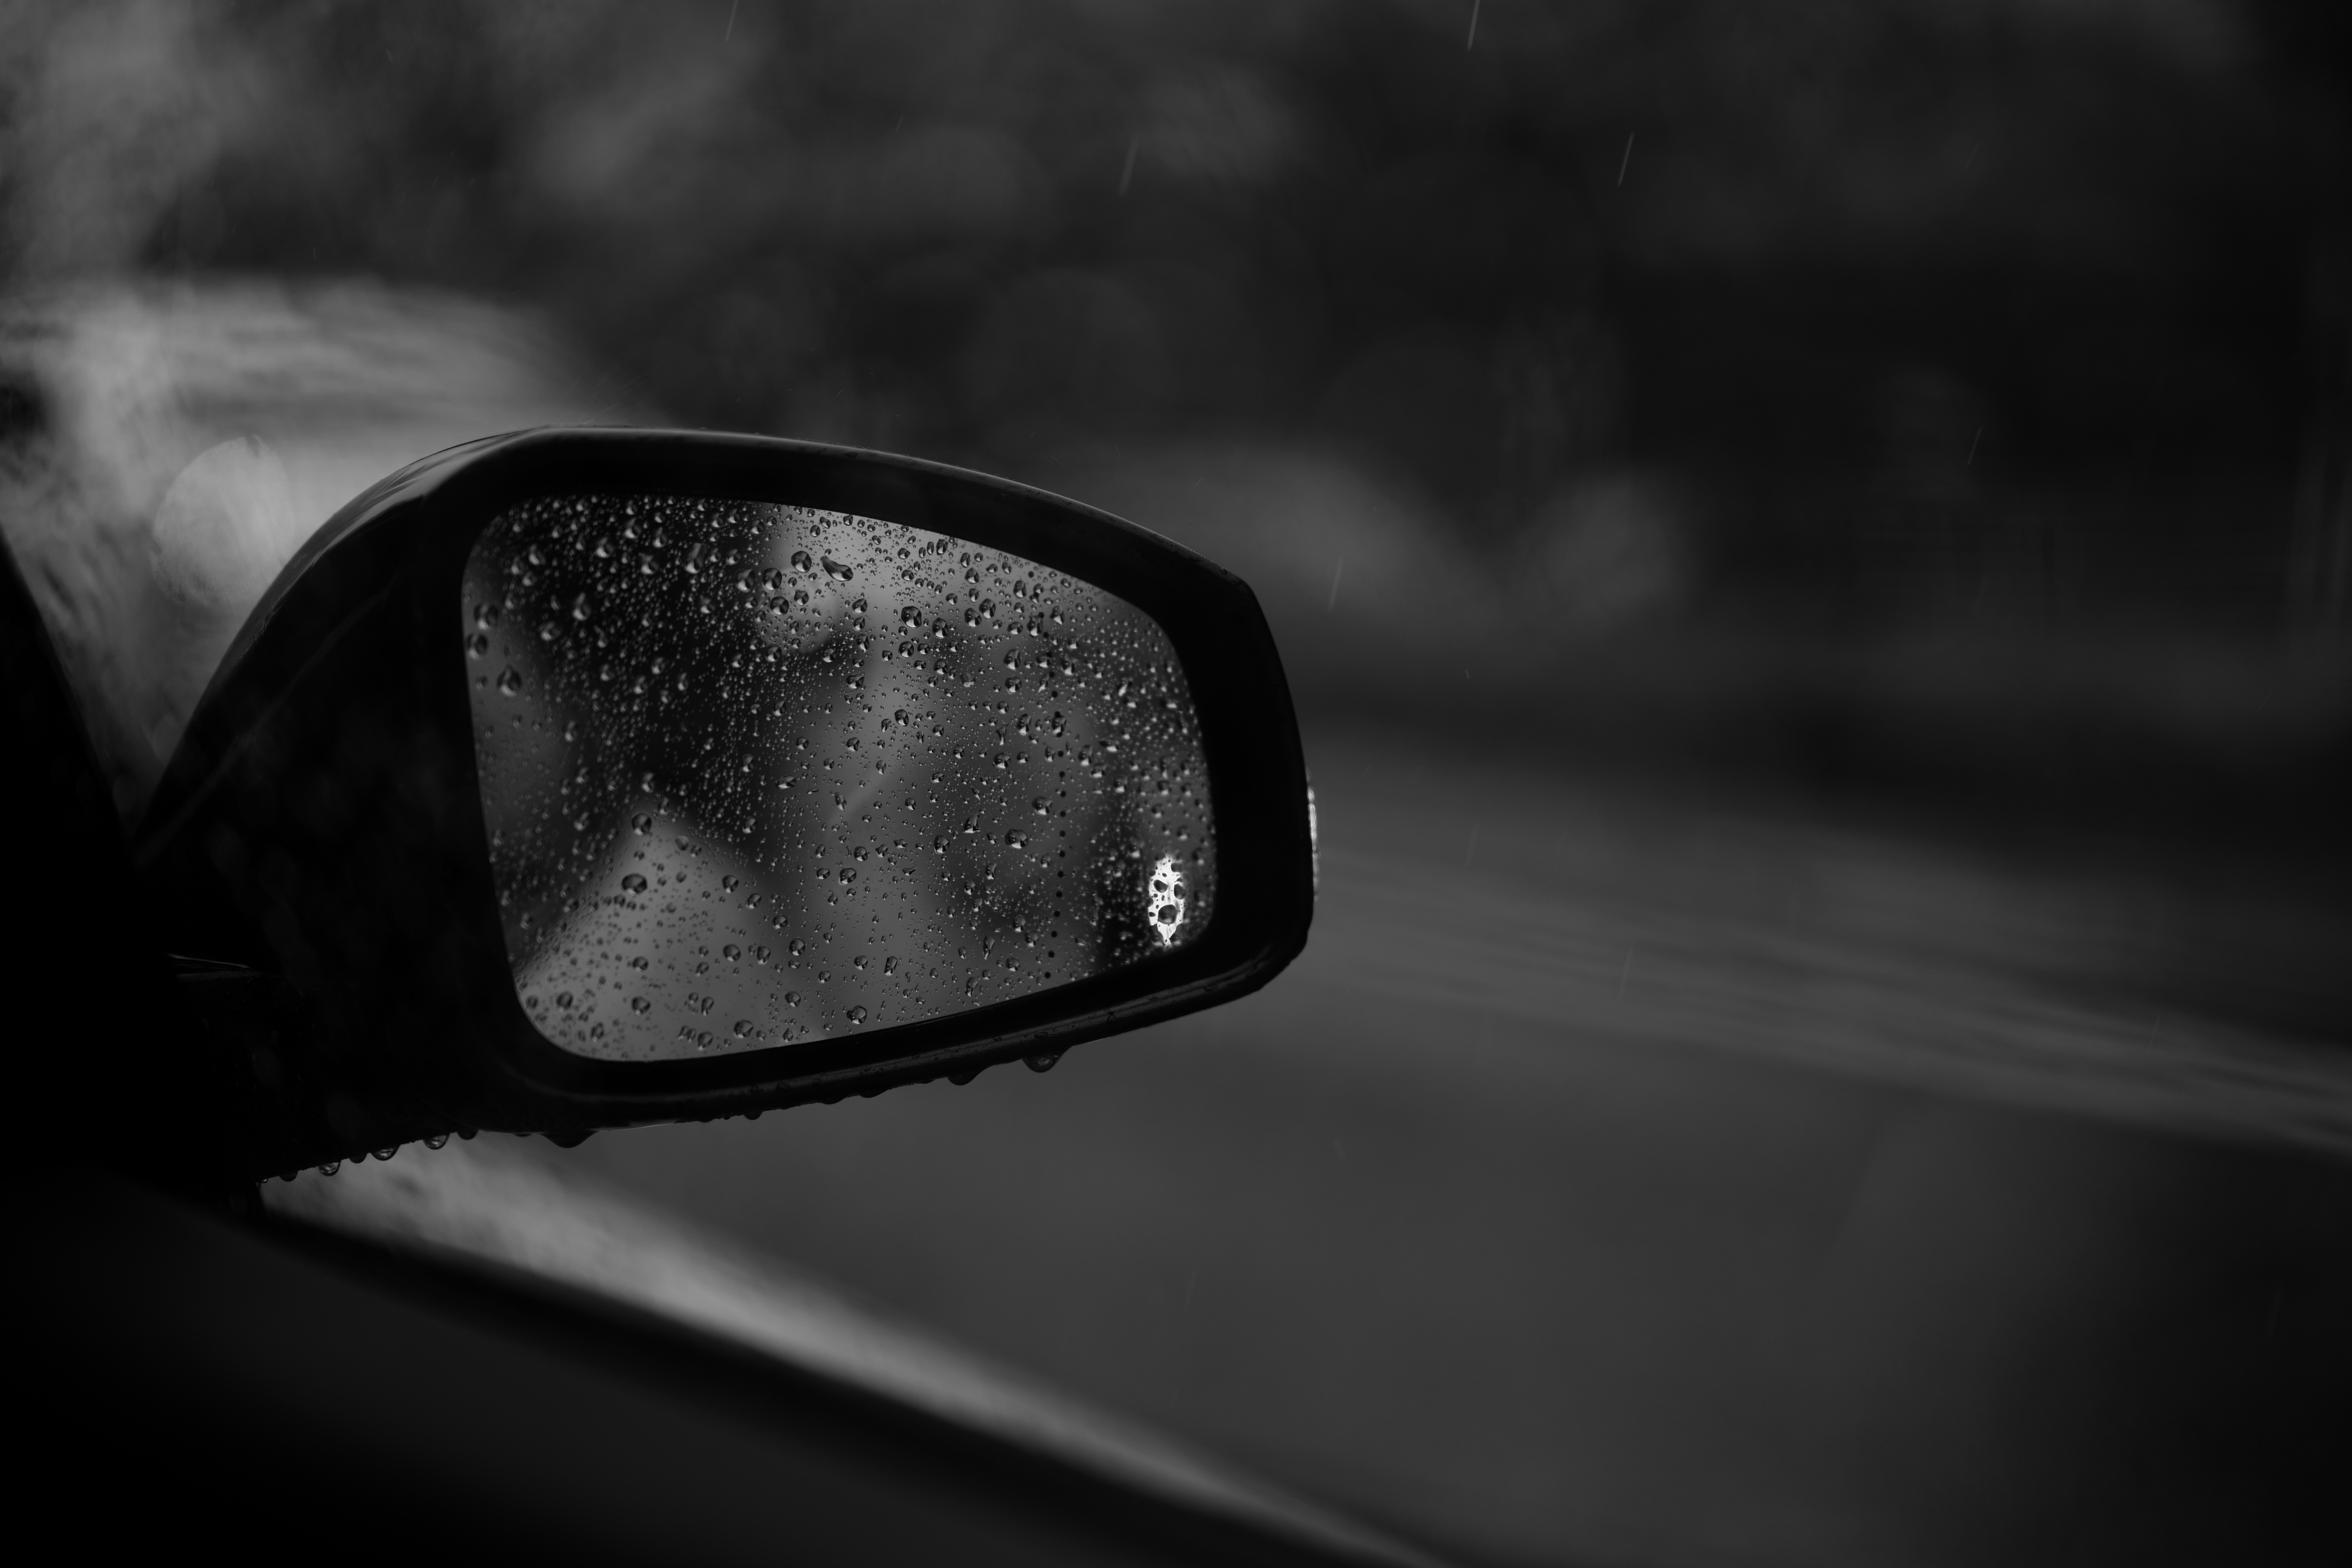 mirror, drops, black, car, glass, bw, chb cell phone wallpapers